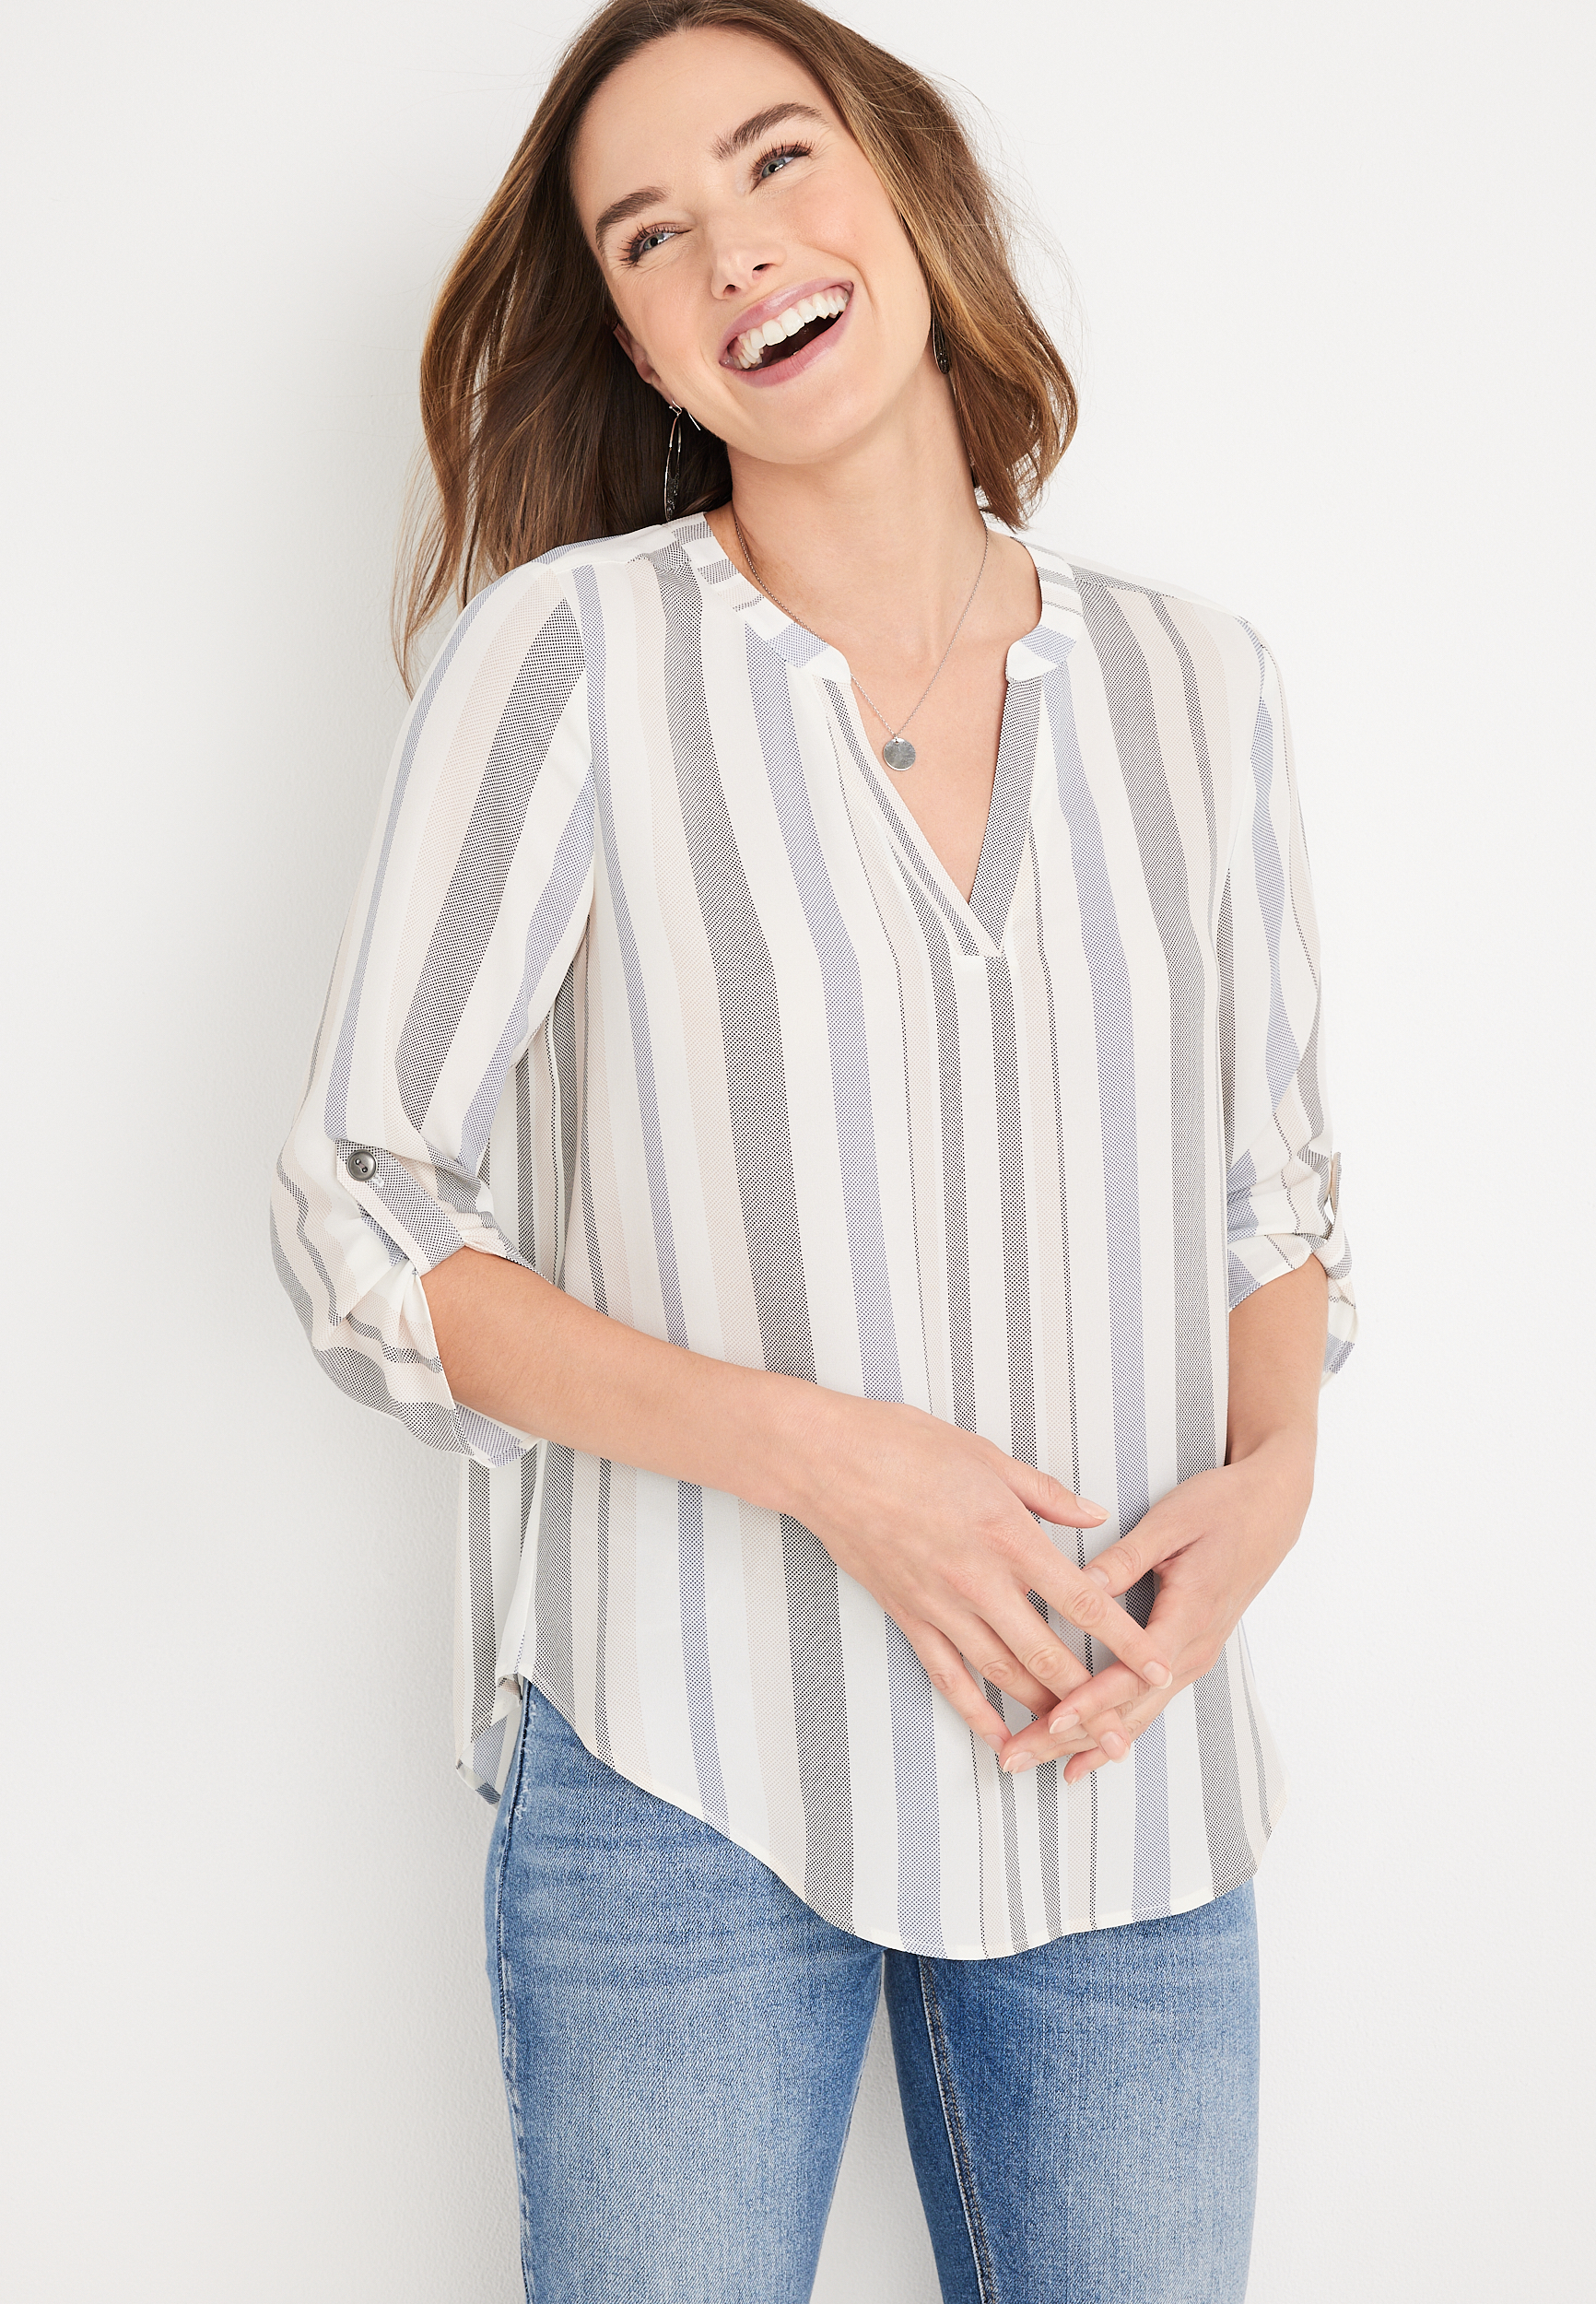 Atwood Striped 3/4 Sleeve Popover Blouse | maurices